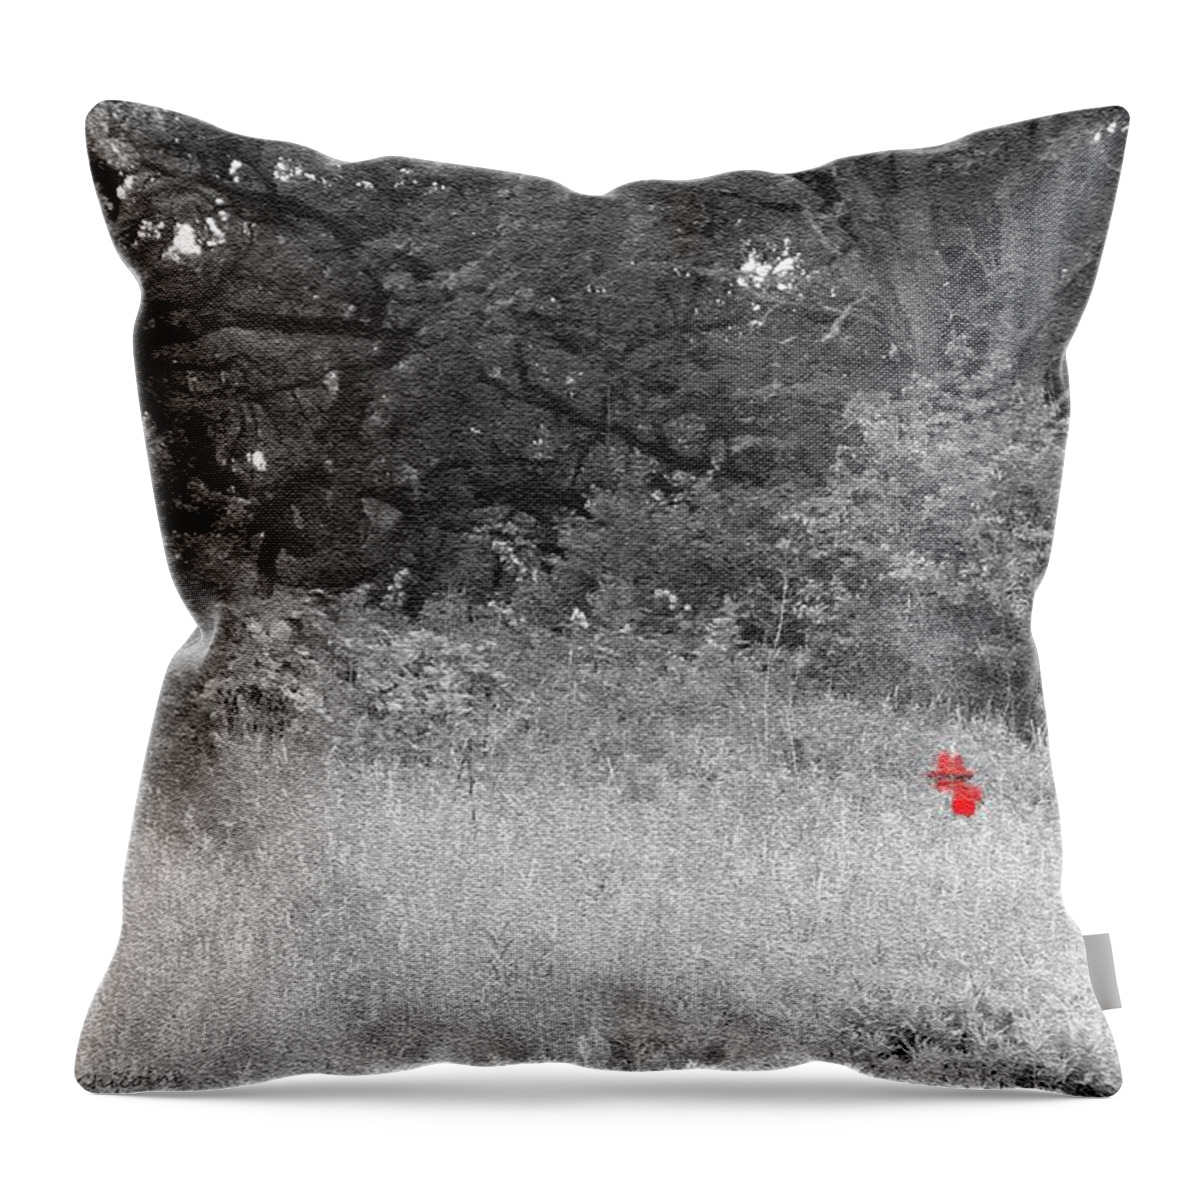 Photography Throw Pillow featuring the photograph Unexpected by Kathie Chicoine